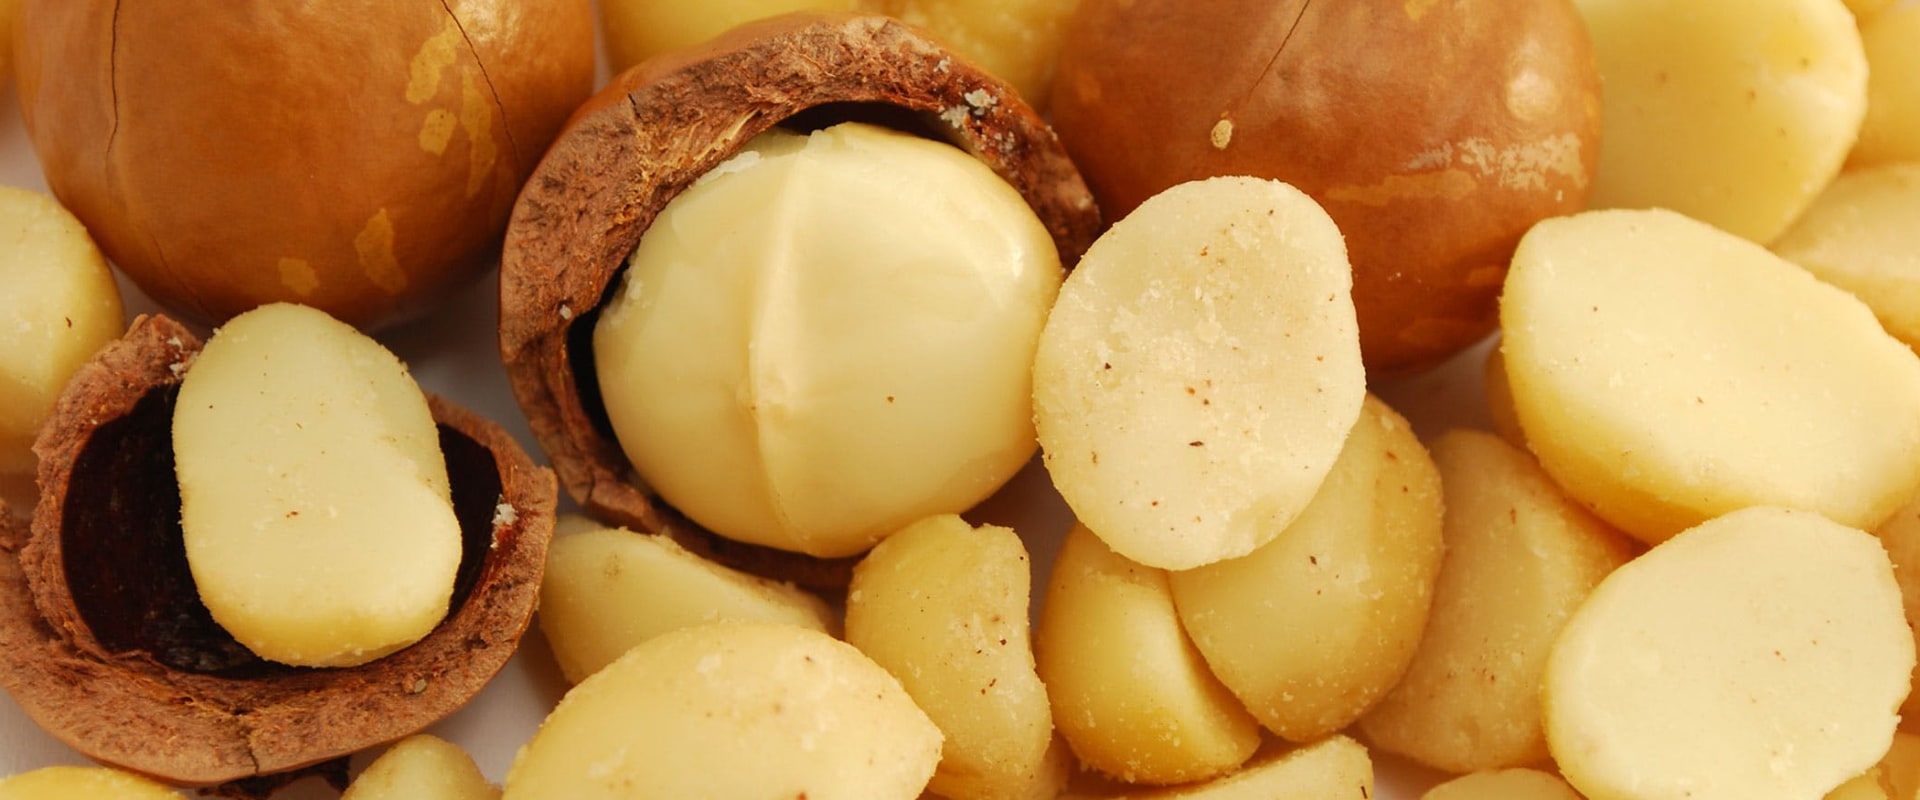 Can you get sick from macadamia nuts?